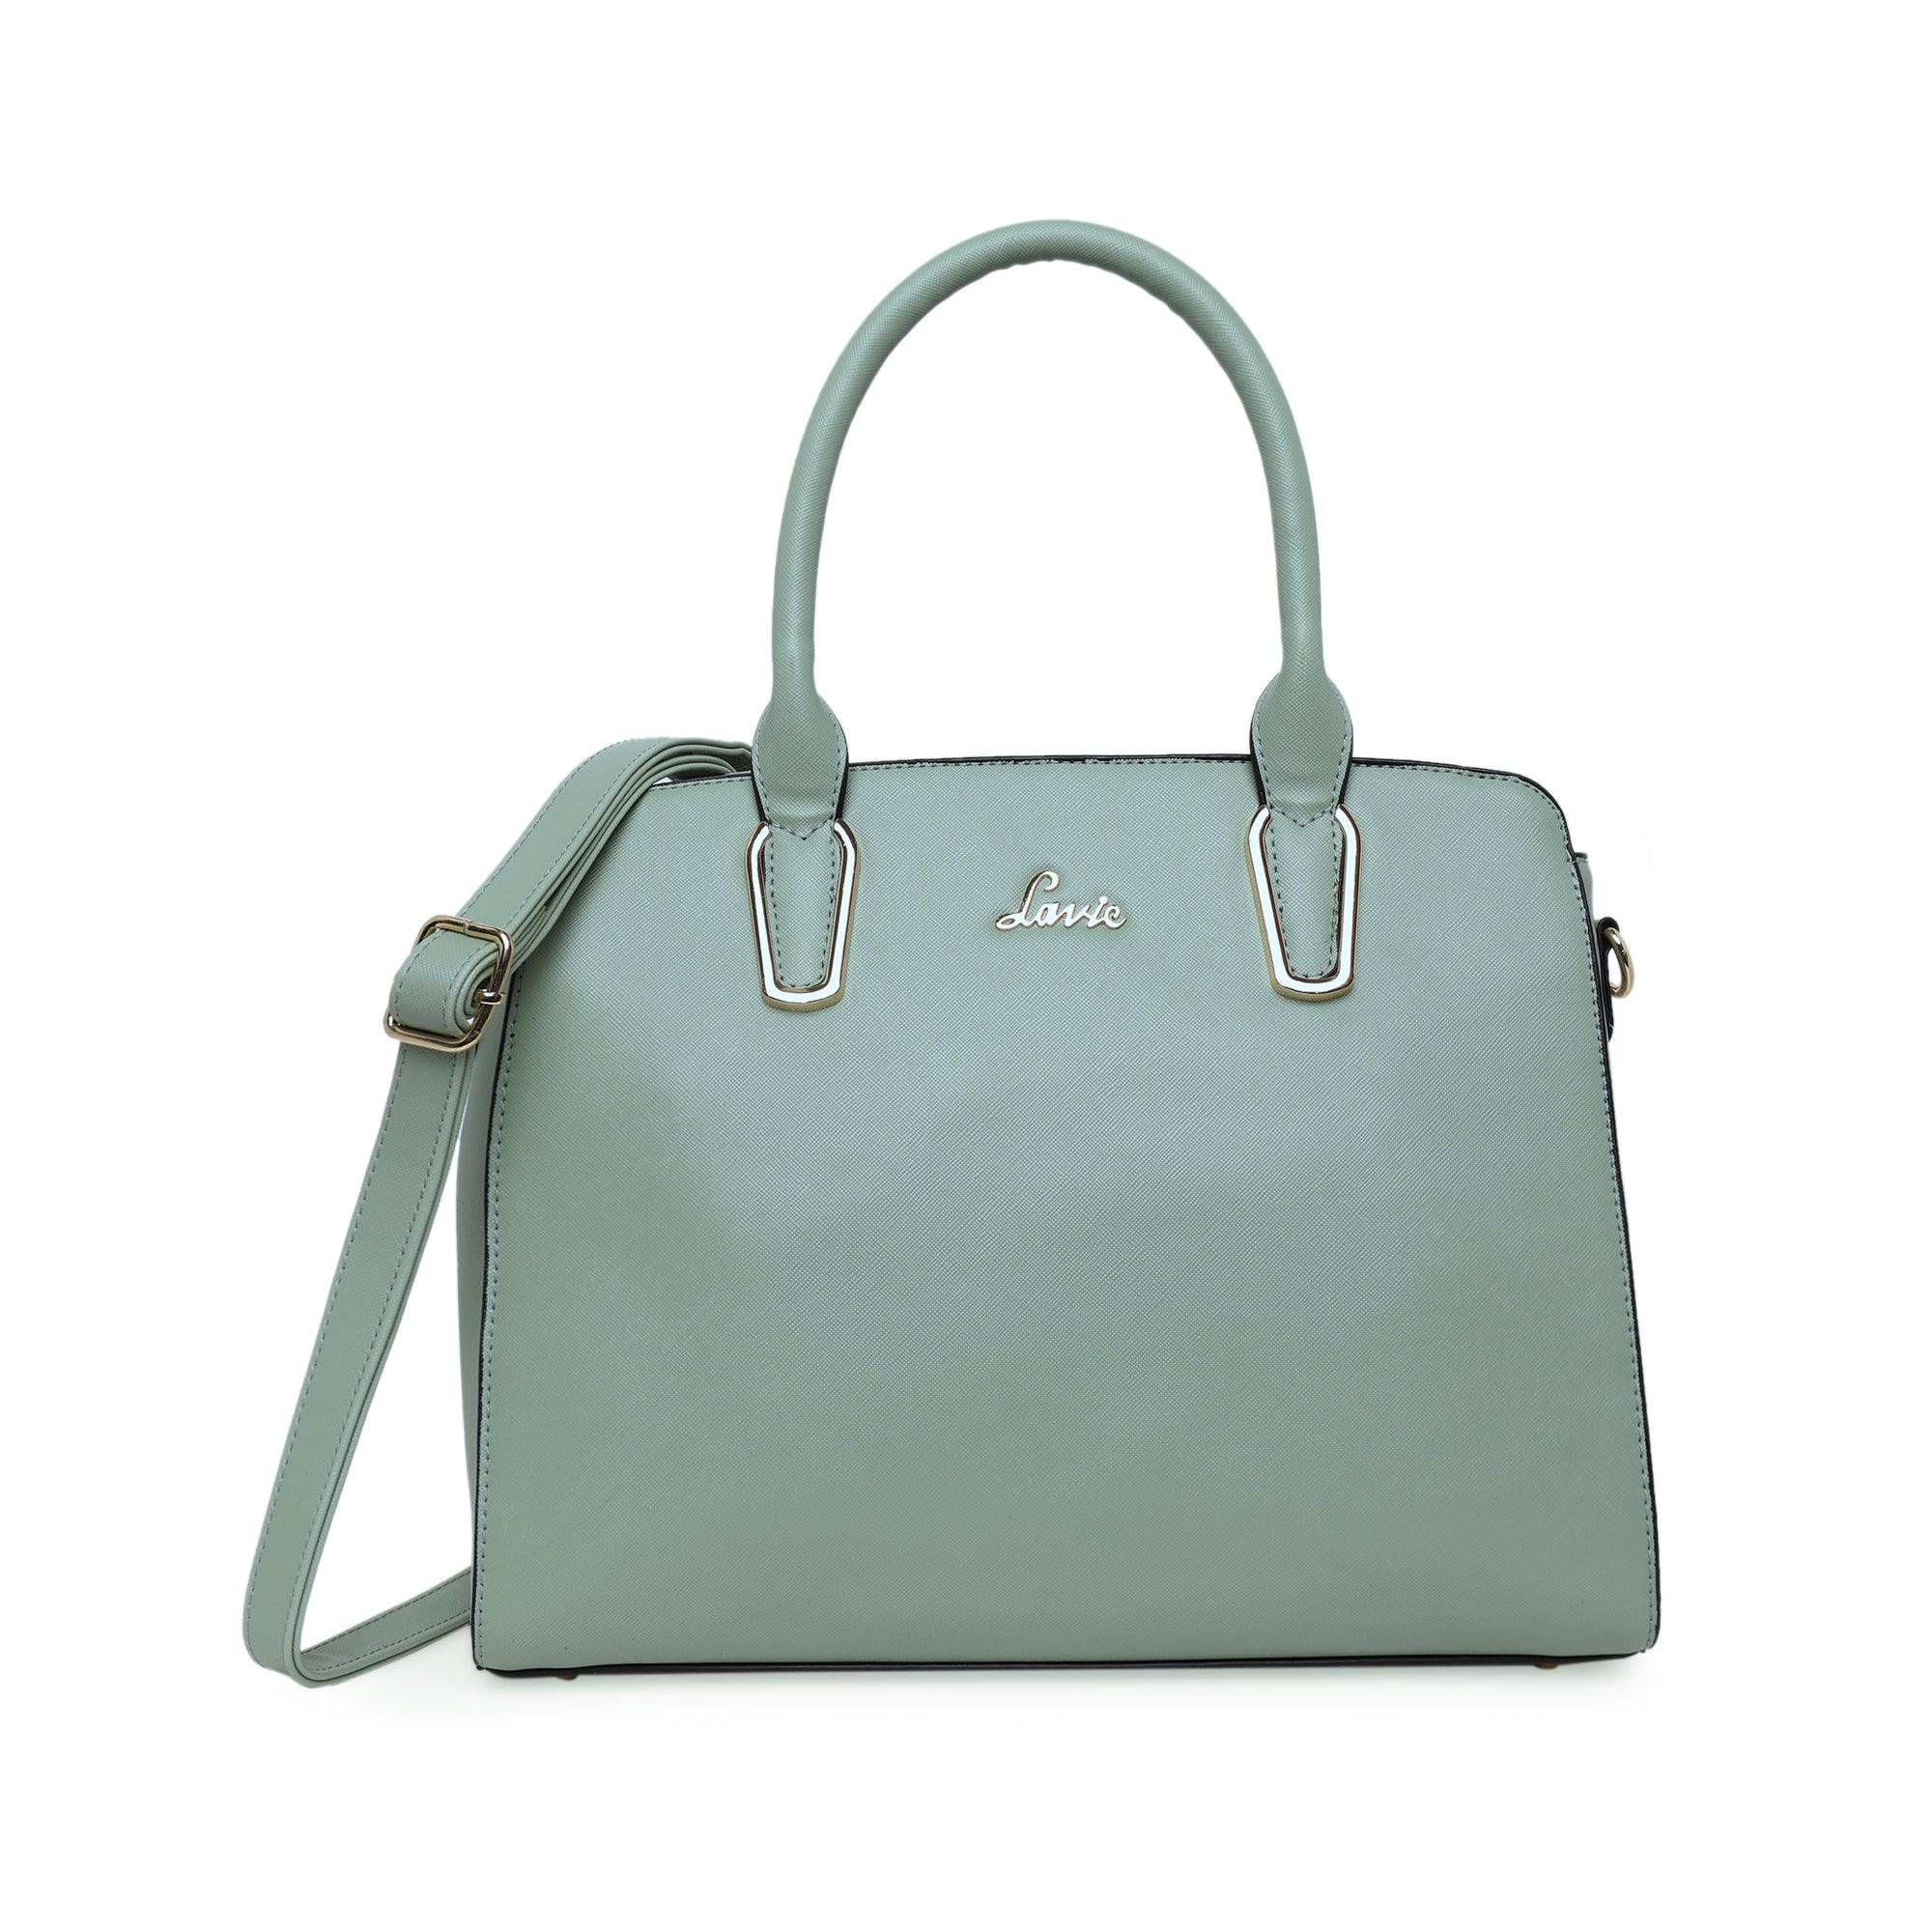 2021 Lowest Price] Lavie Betula Womens Tote Bag Price in India &  Specifications